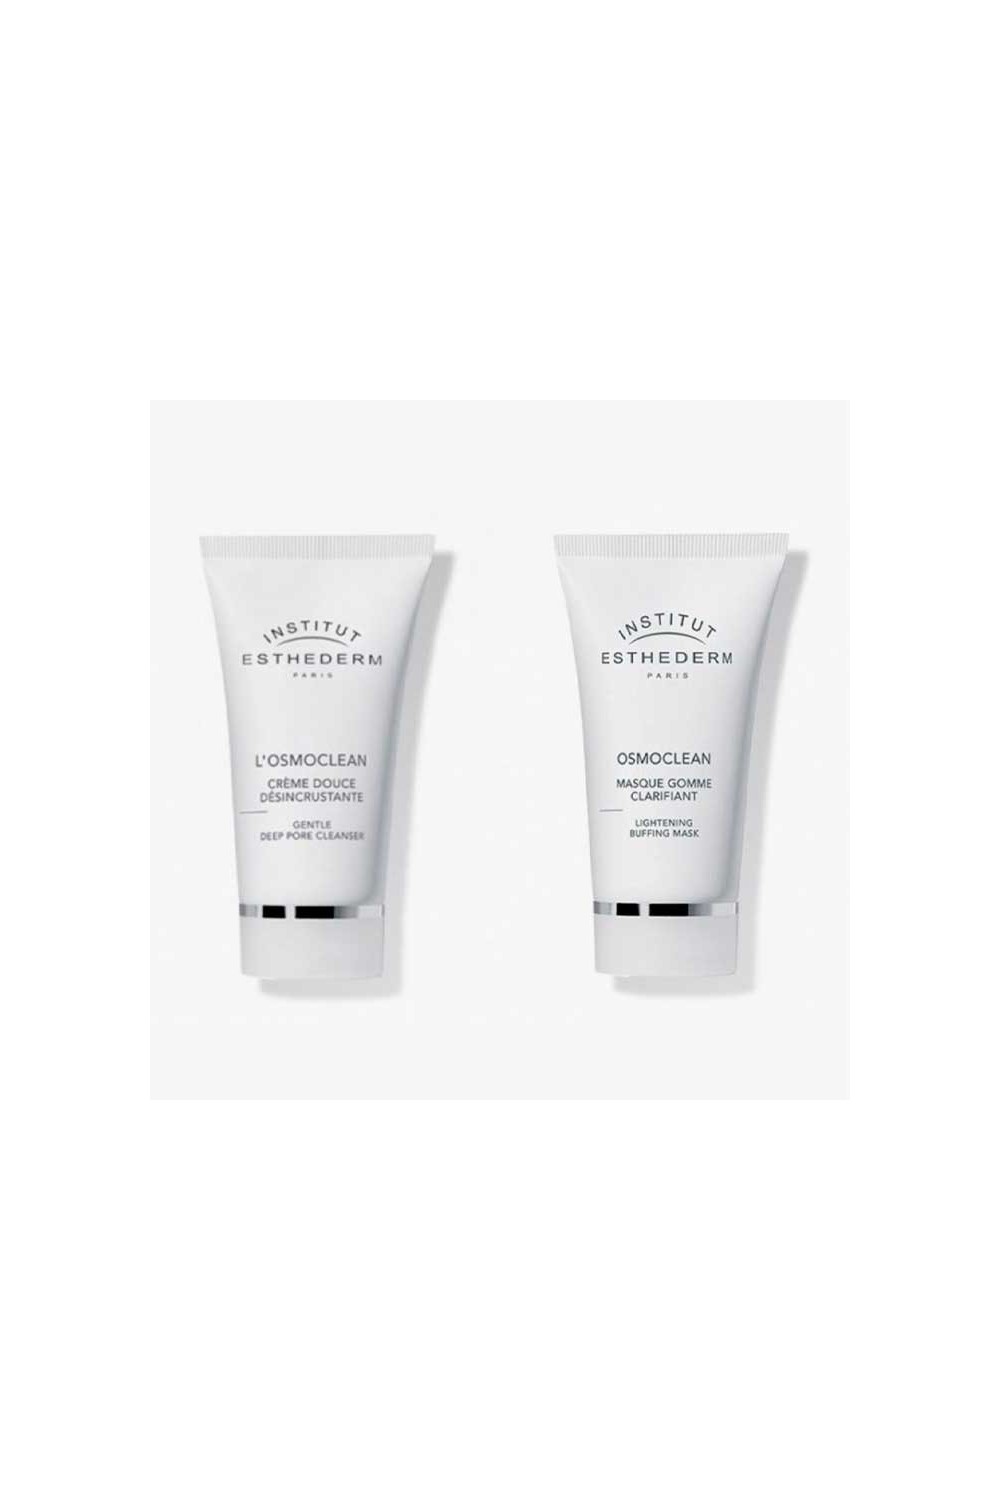 Institut Esthederm Pack Osmoclean Descaling Cream 75ml+ Osmoclean Exfoliating Mask 75ml